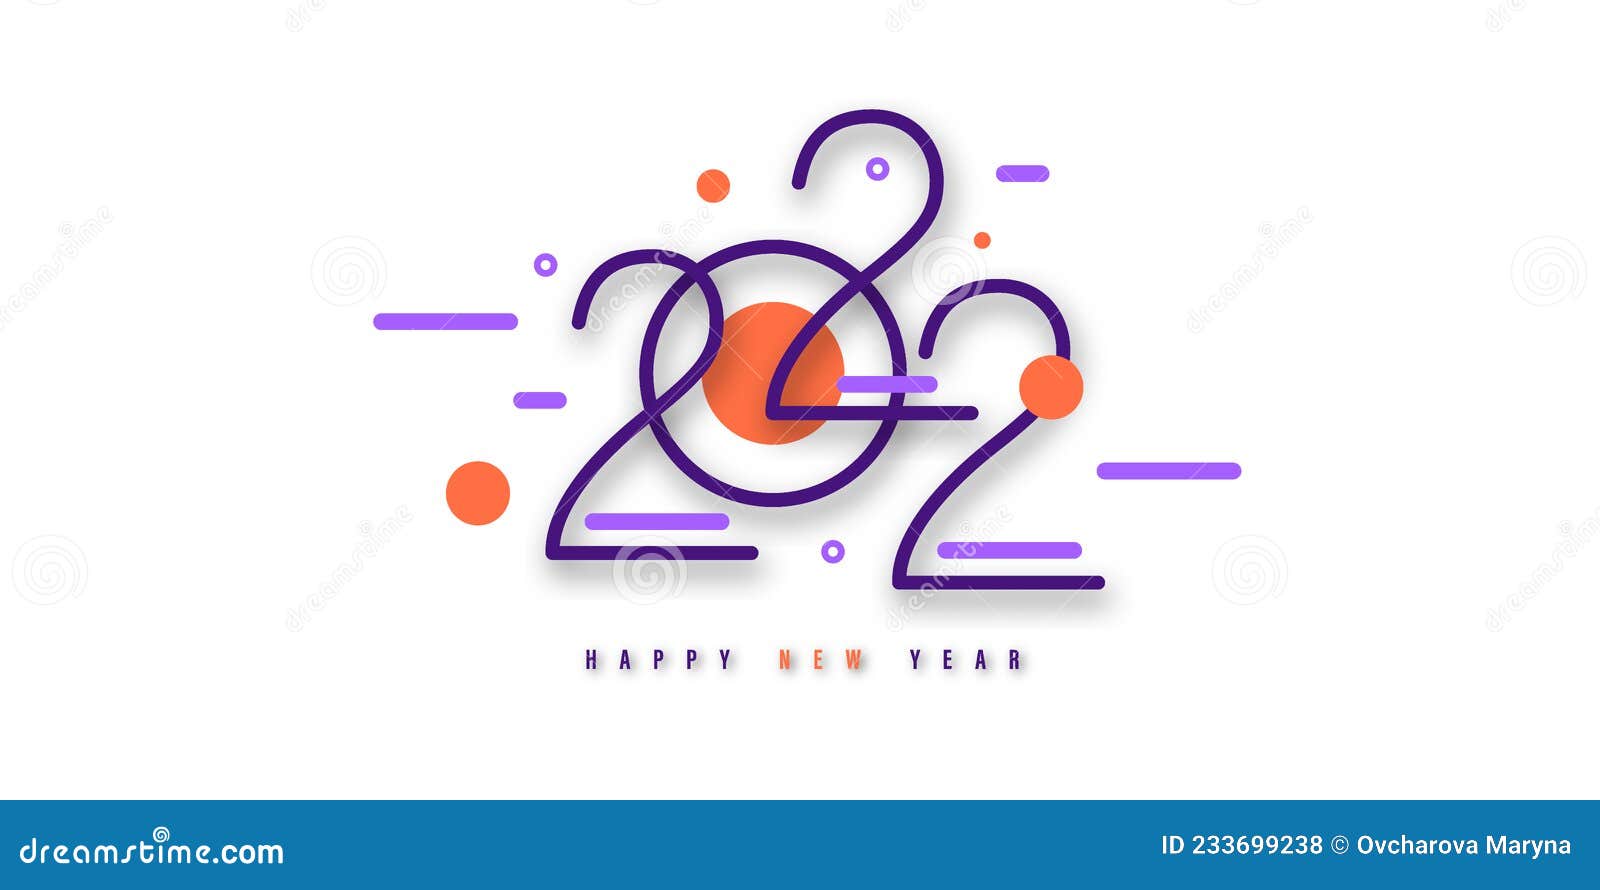 Happy New Year 2022. Festive White Background with Colorful Numbers. Banner  with Geometric Shapes Stock Vector - Illustration of background, business:  233699238